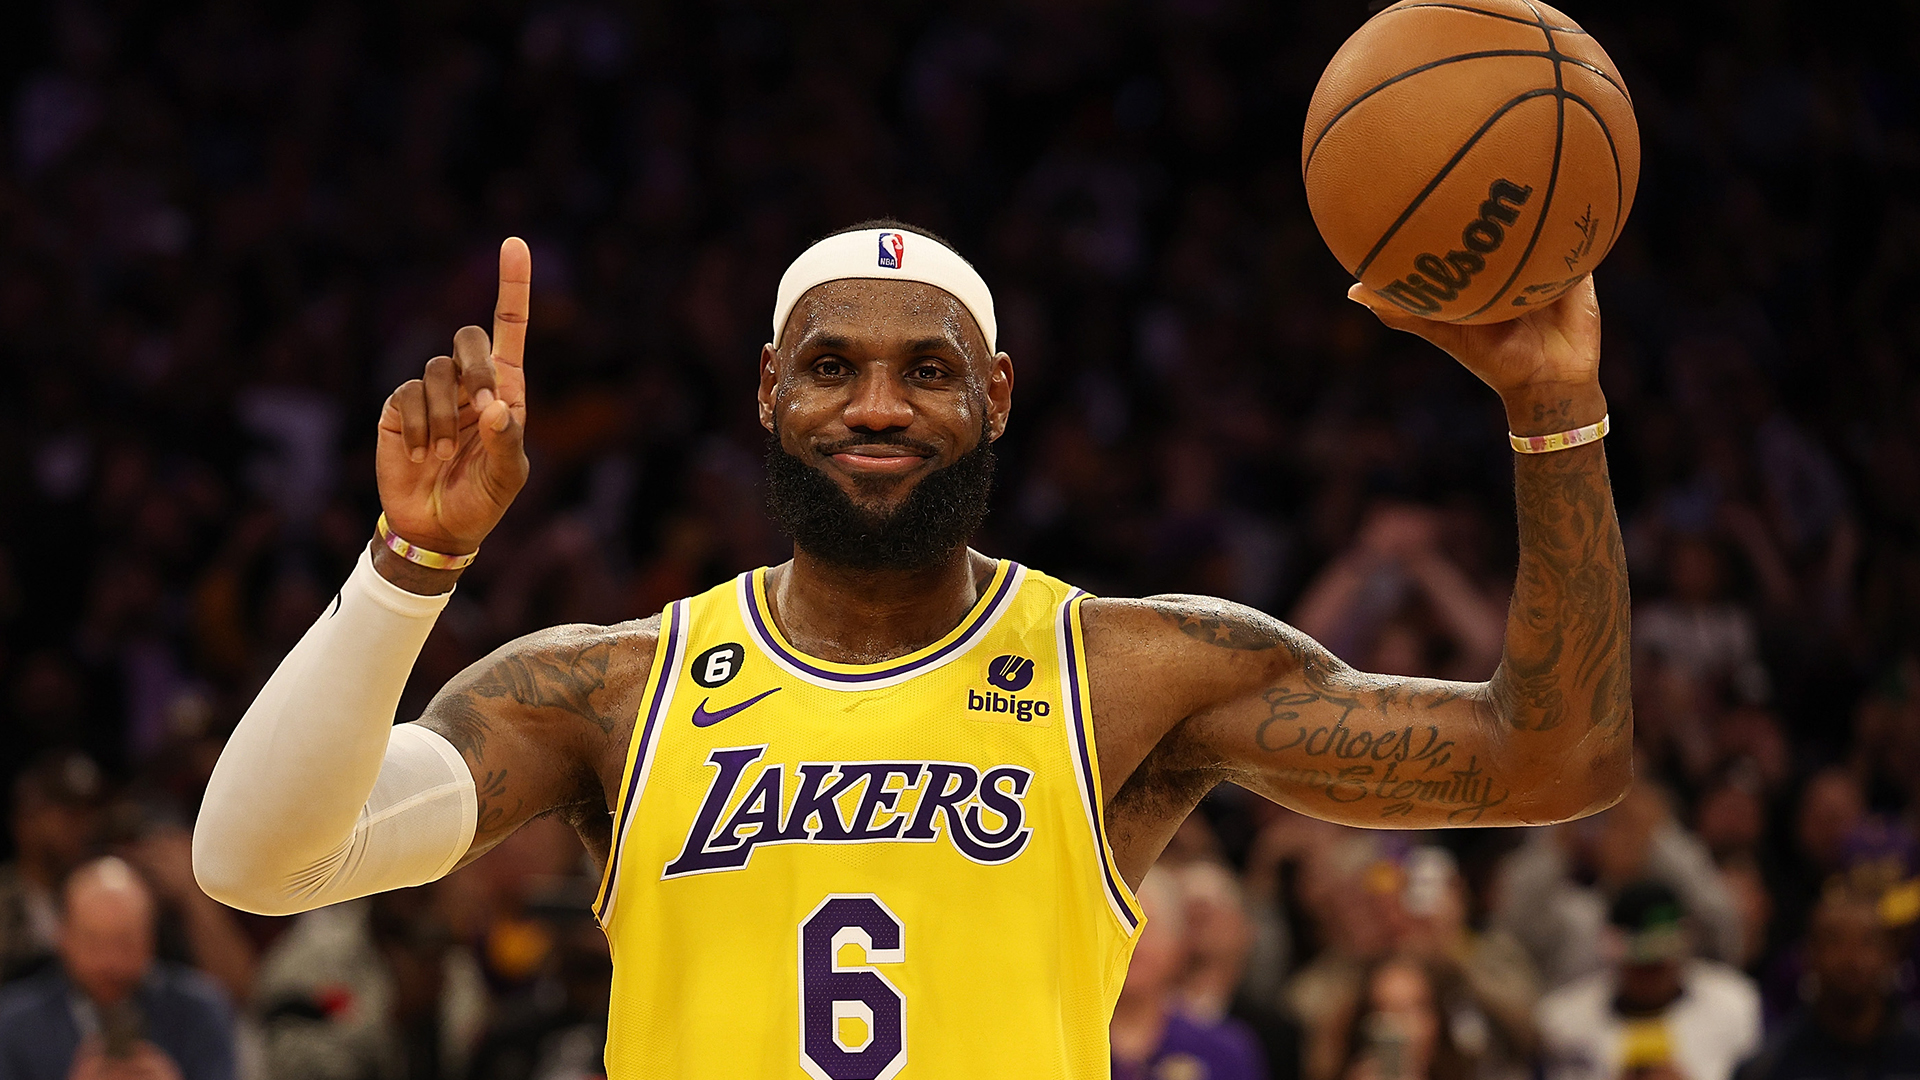 LeBron James' NBA All-Time Leading Scorer Jersey Could Fetch Over $3M If It Hit The Auction Block, Report Says